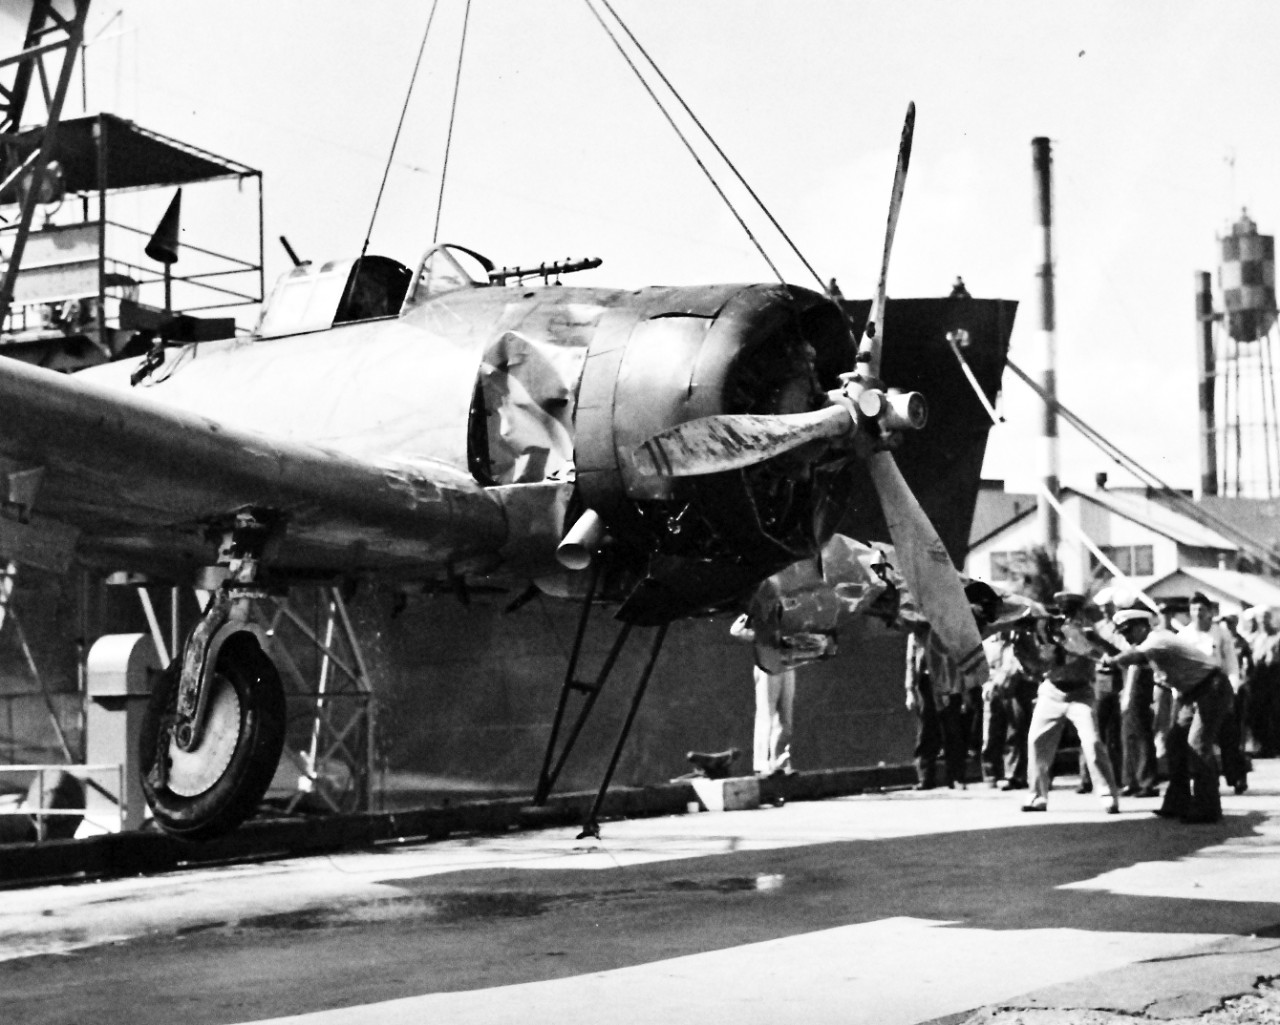 80-G-33016:   Japanese Attack on Pearl Harbor Attack, 7 December 1941.  Japanese Navy Type 99 Carrier Bomber, an Aichi D3A “VAL”,  shot down during the attack, being lifted for transportation.   U.S. Navy photograph, now in the collections of the National Archives.  (9/13/2013).